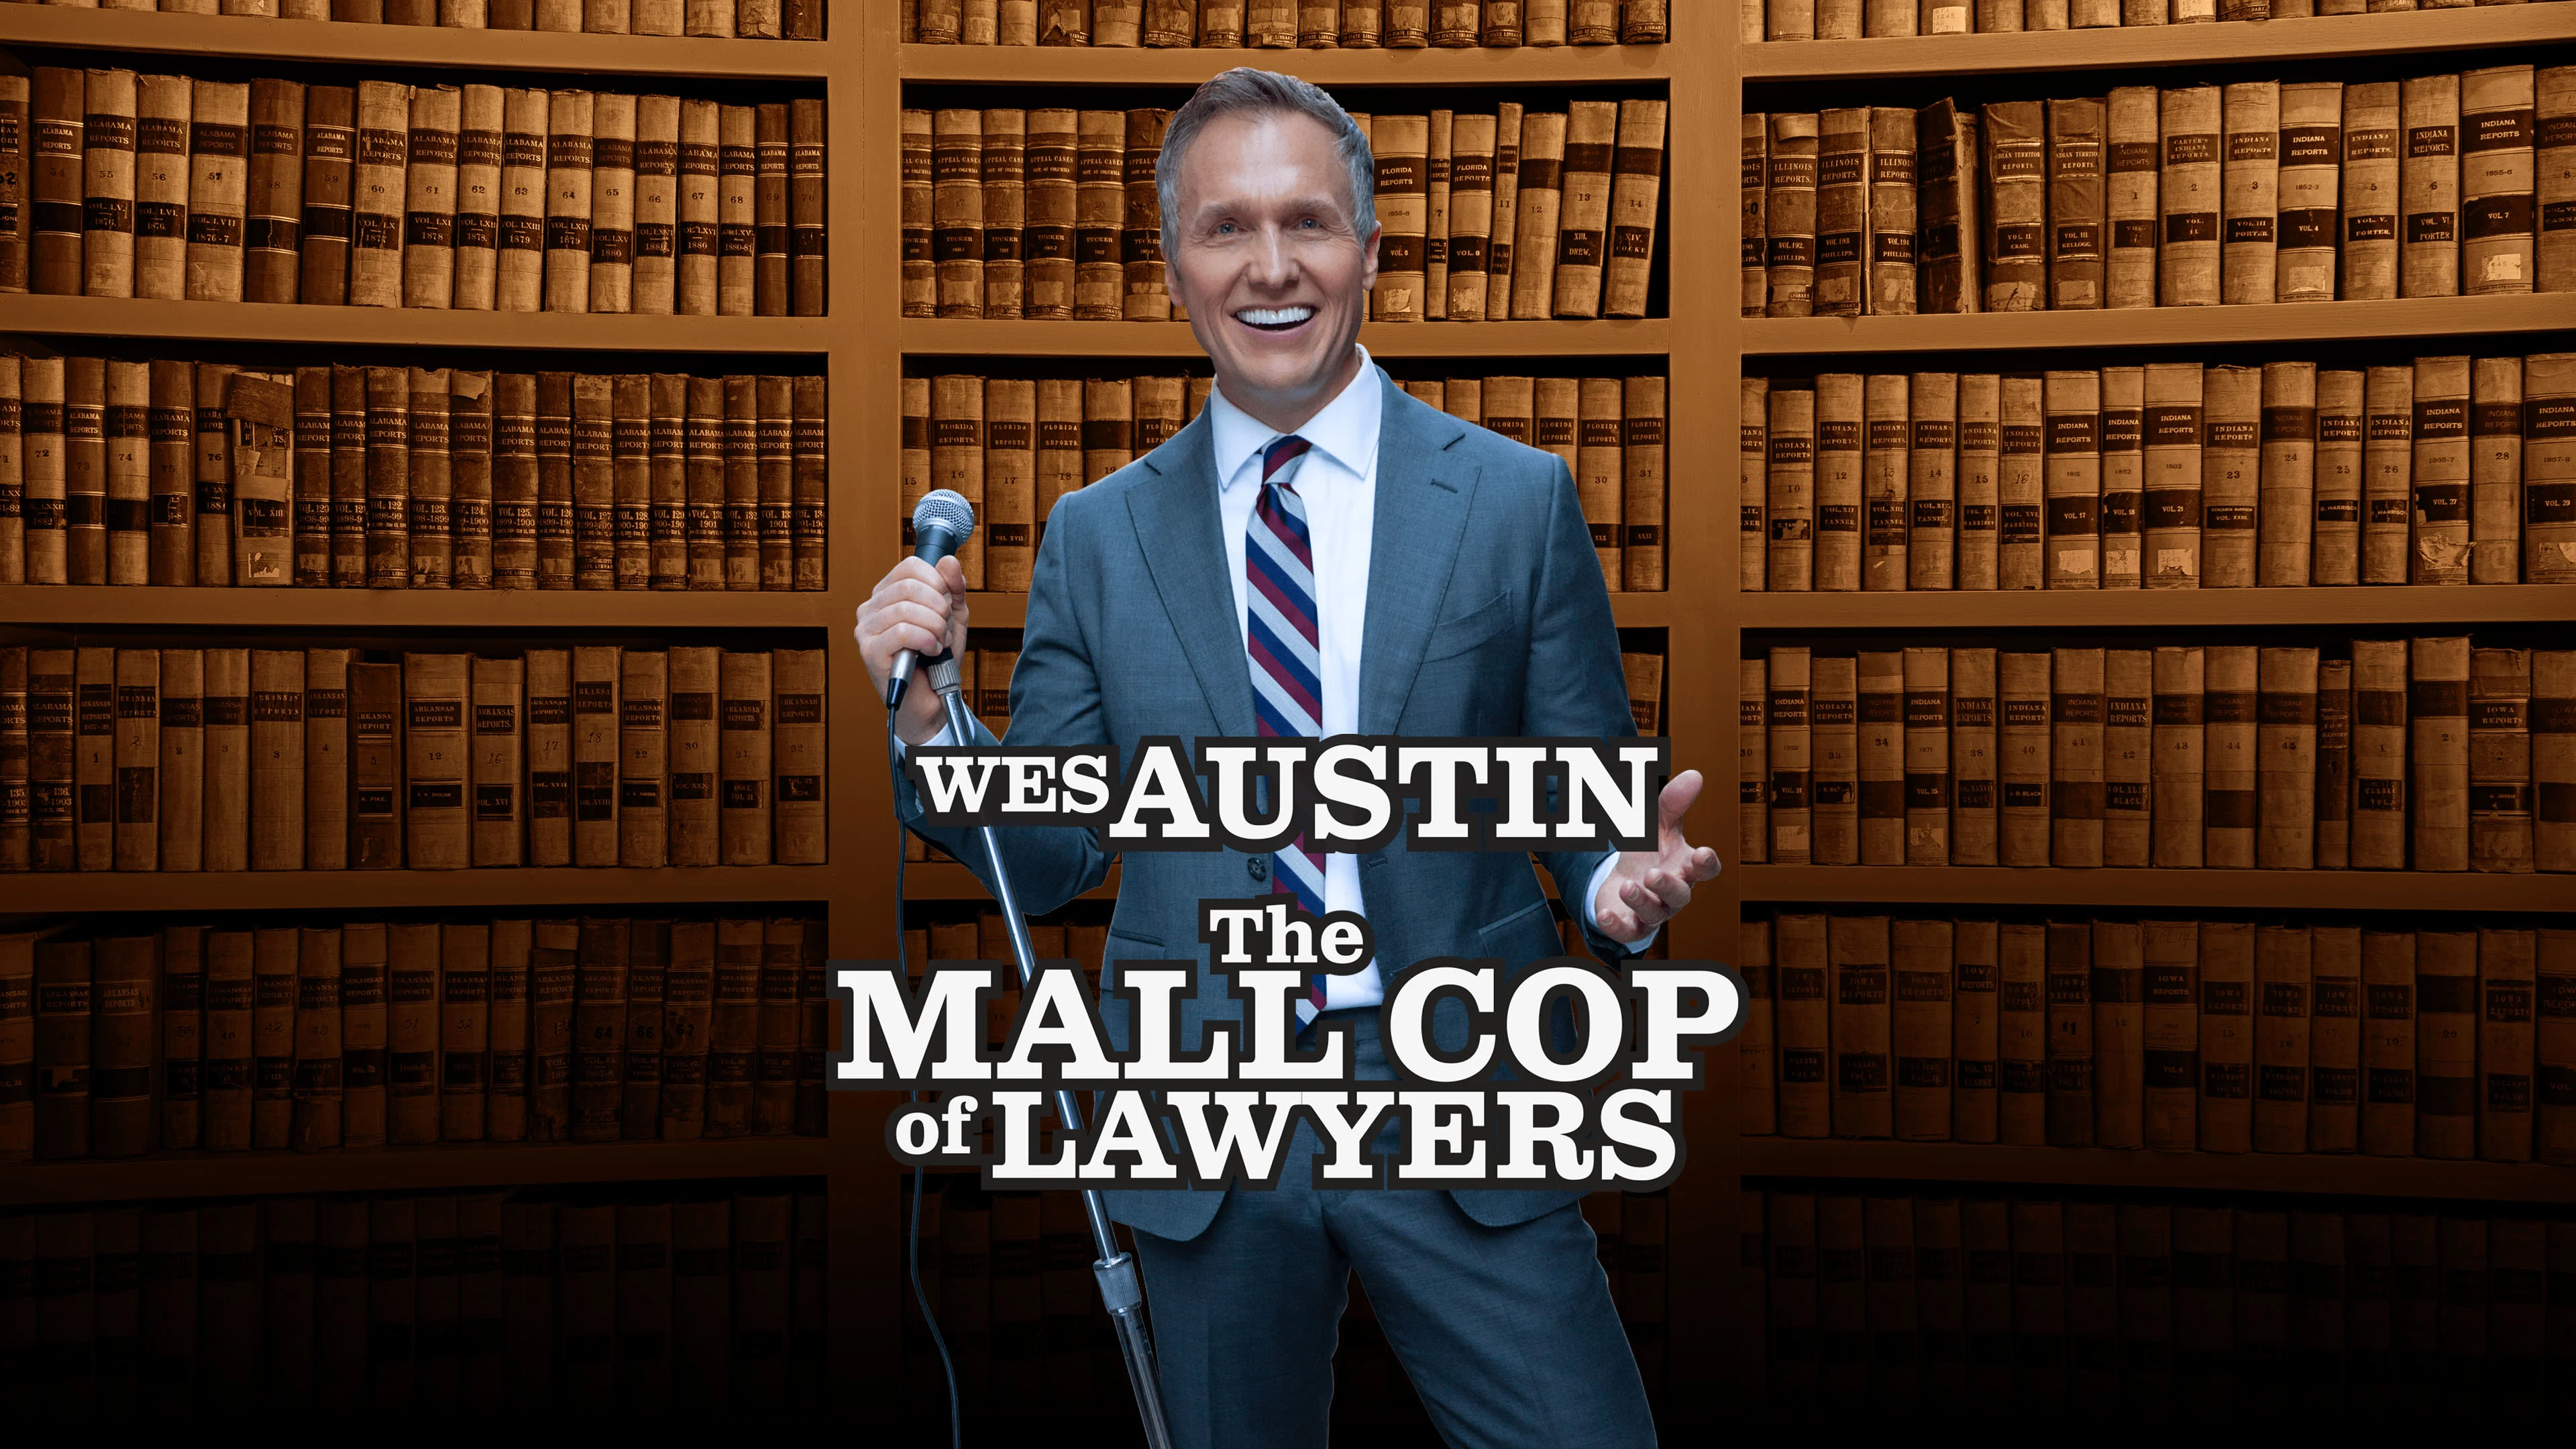 Wes Austin - The Mall Cop of Lawyers